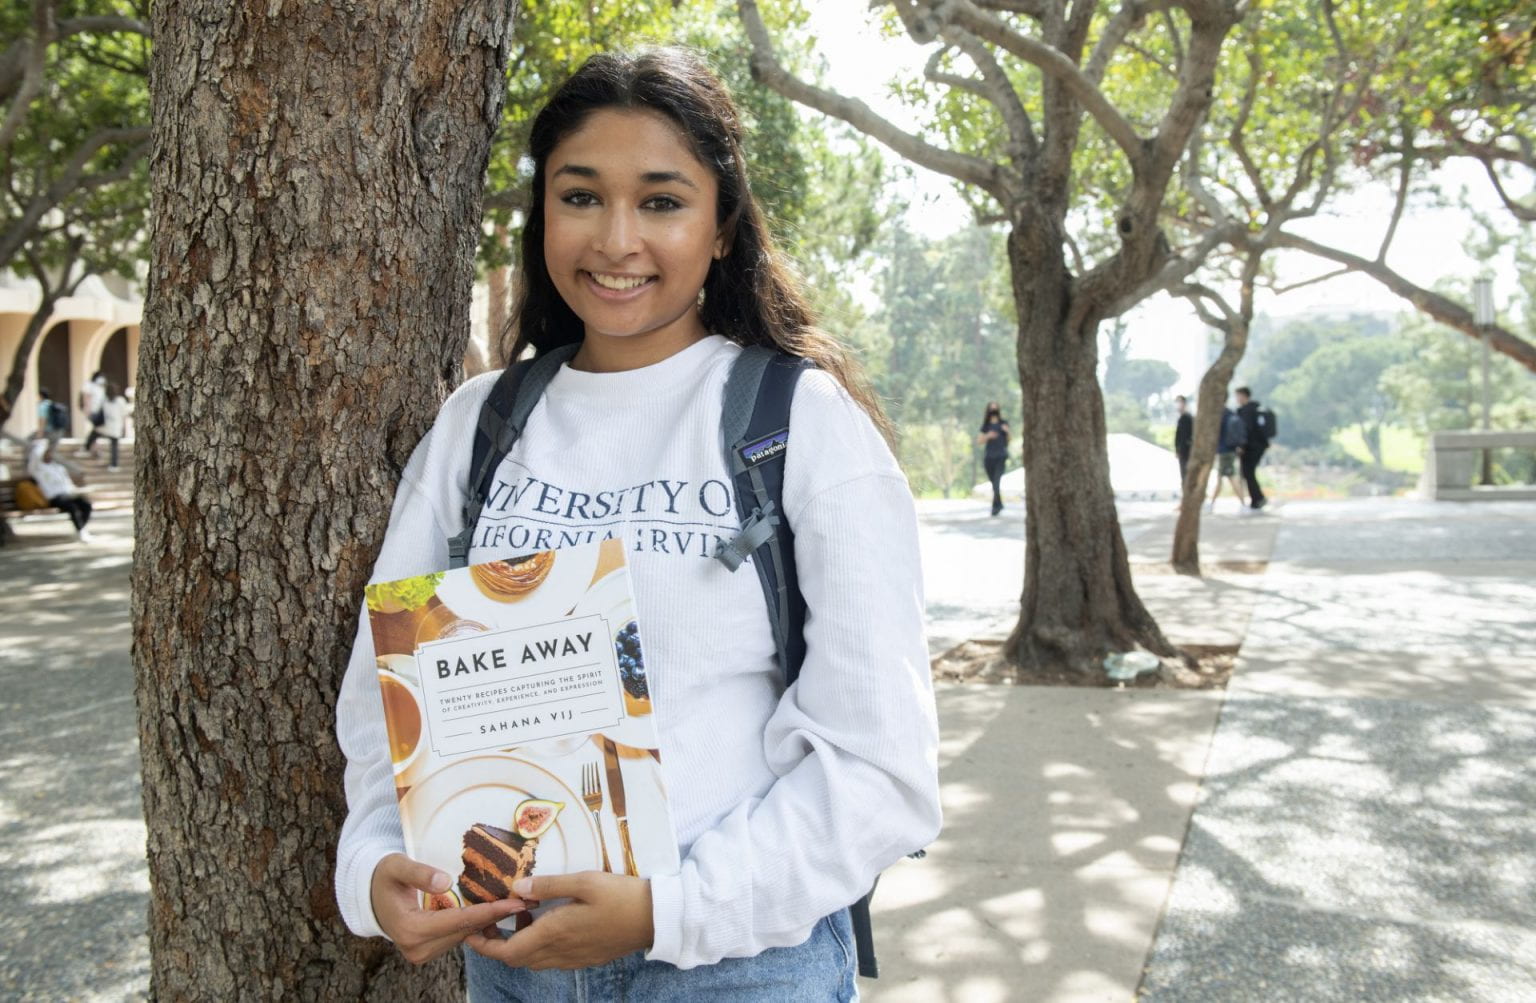 UICI student Sahana Vij standing in front of a tree and holding the cookbook Bake away that she wrote.